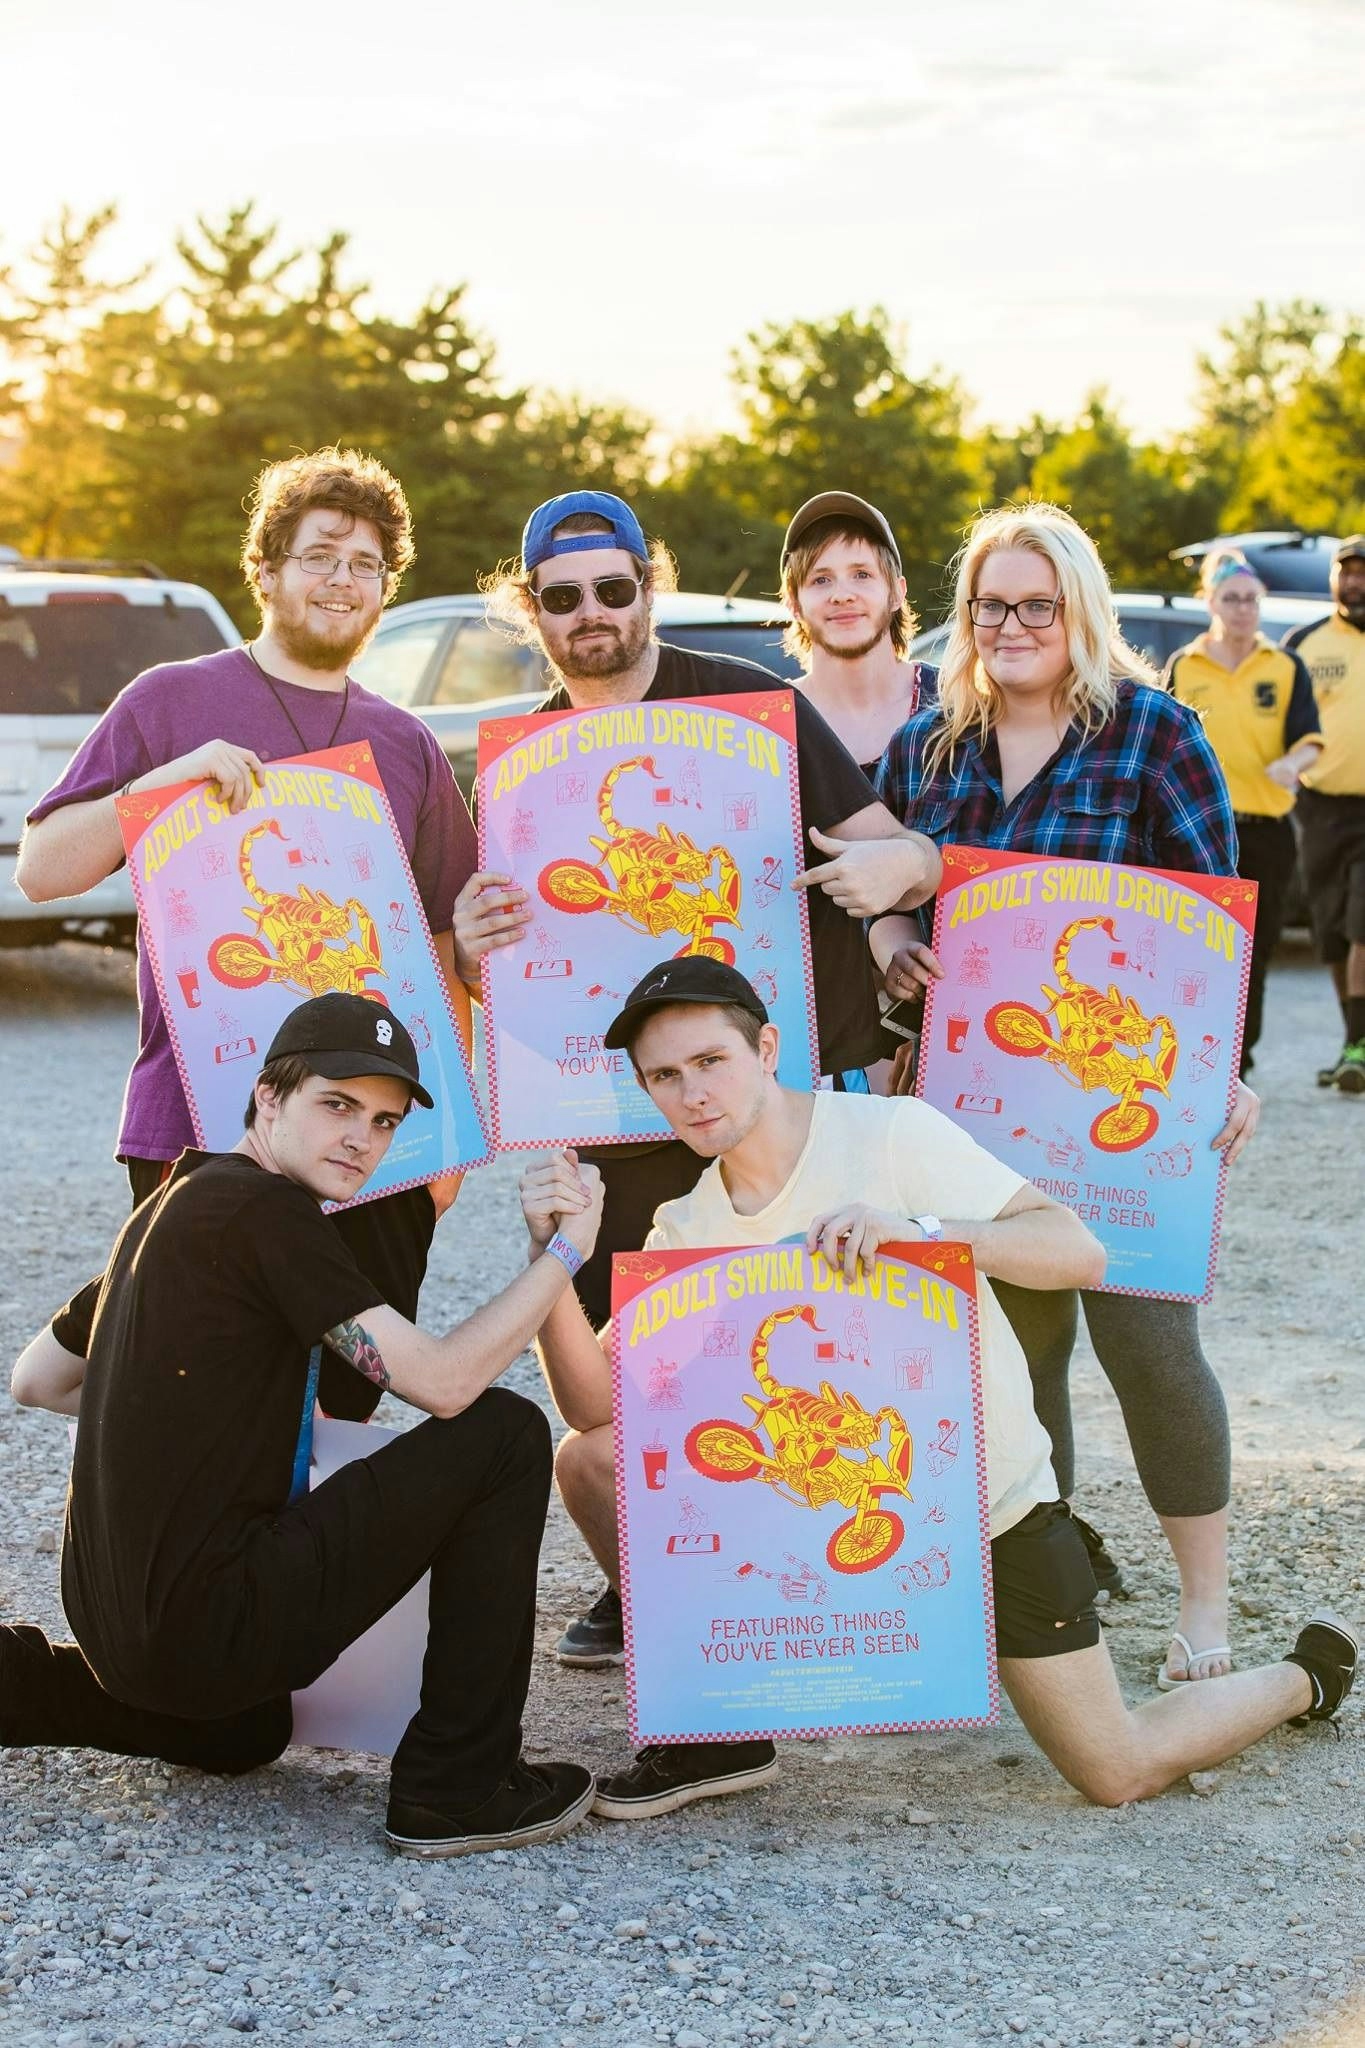 Adult Swim Drive-In event guests holding merchandise